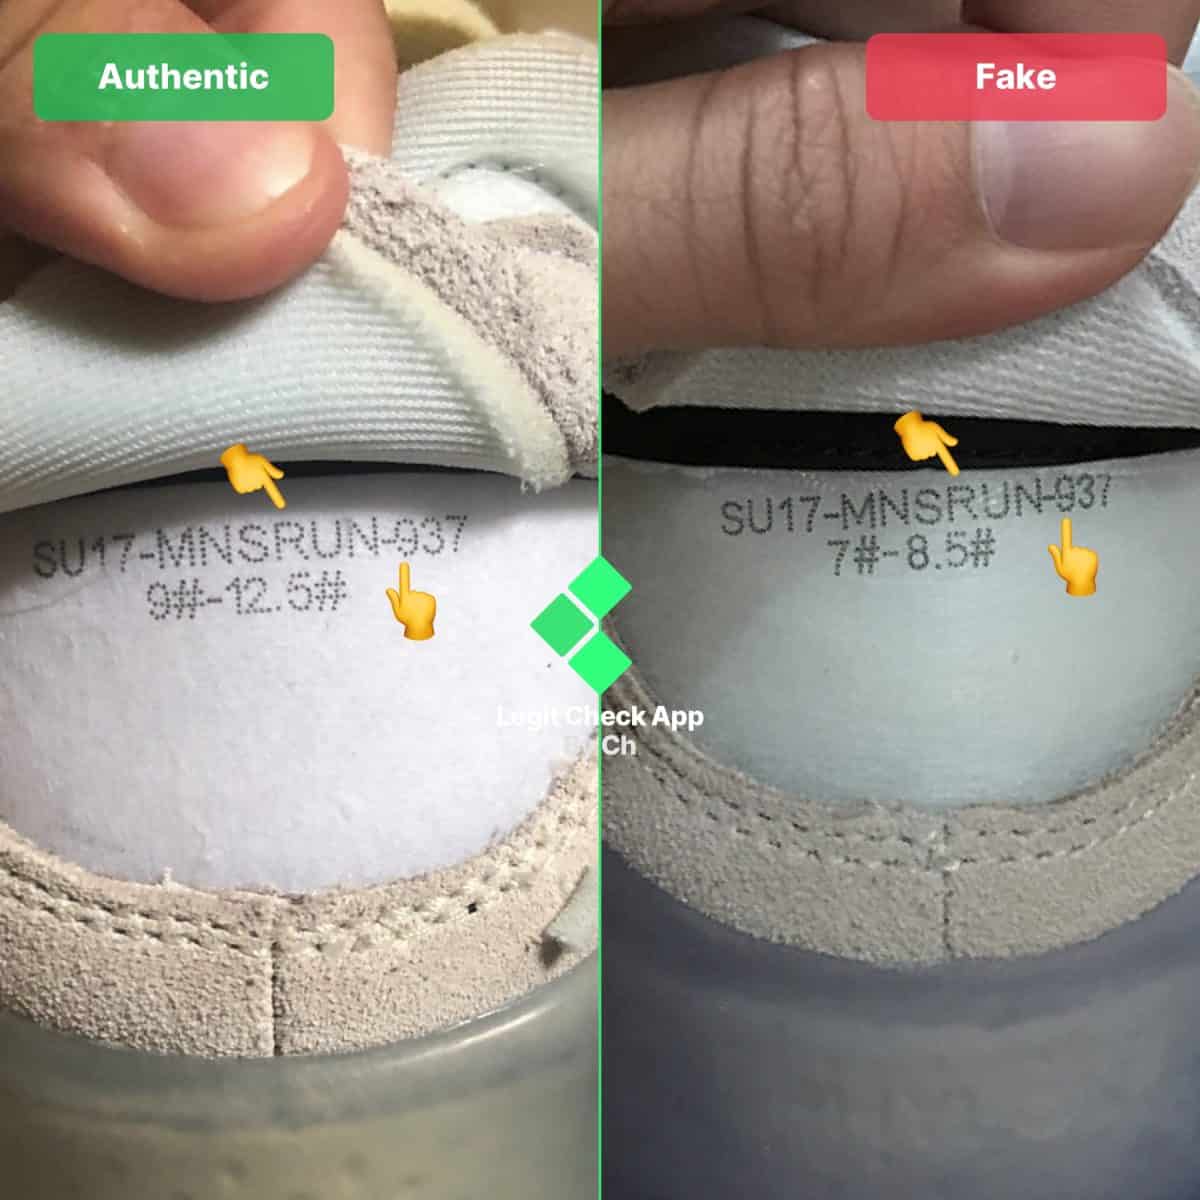 how to spot fake off-white air max 90